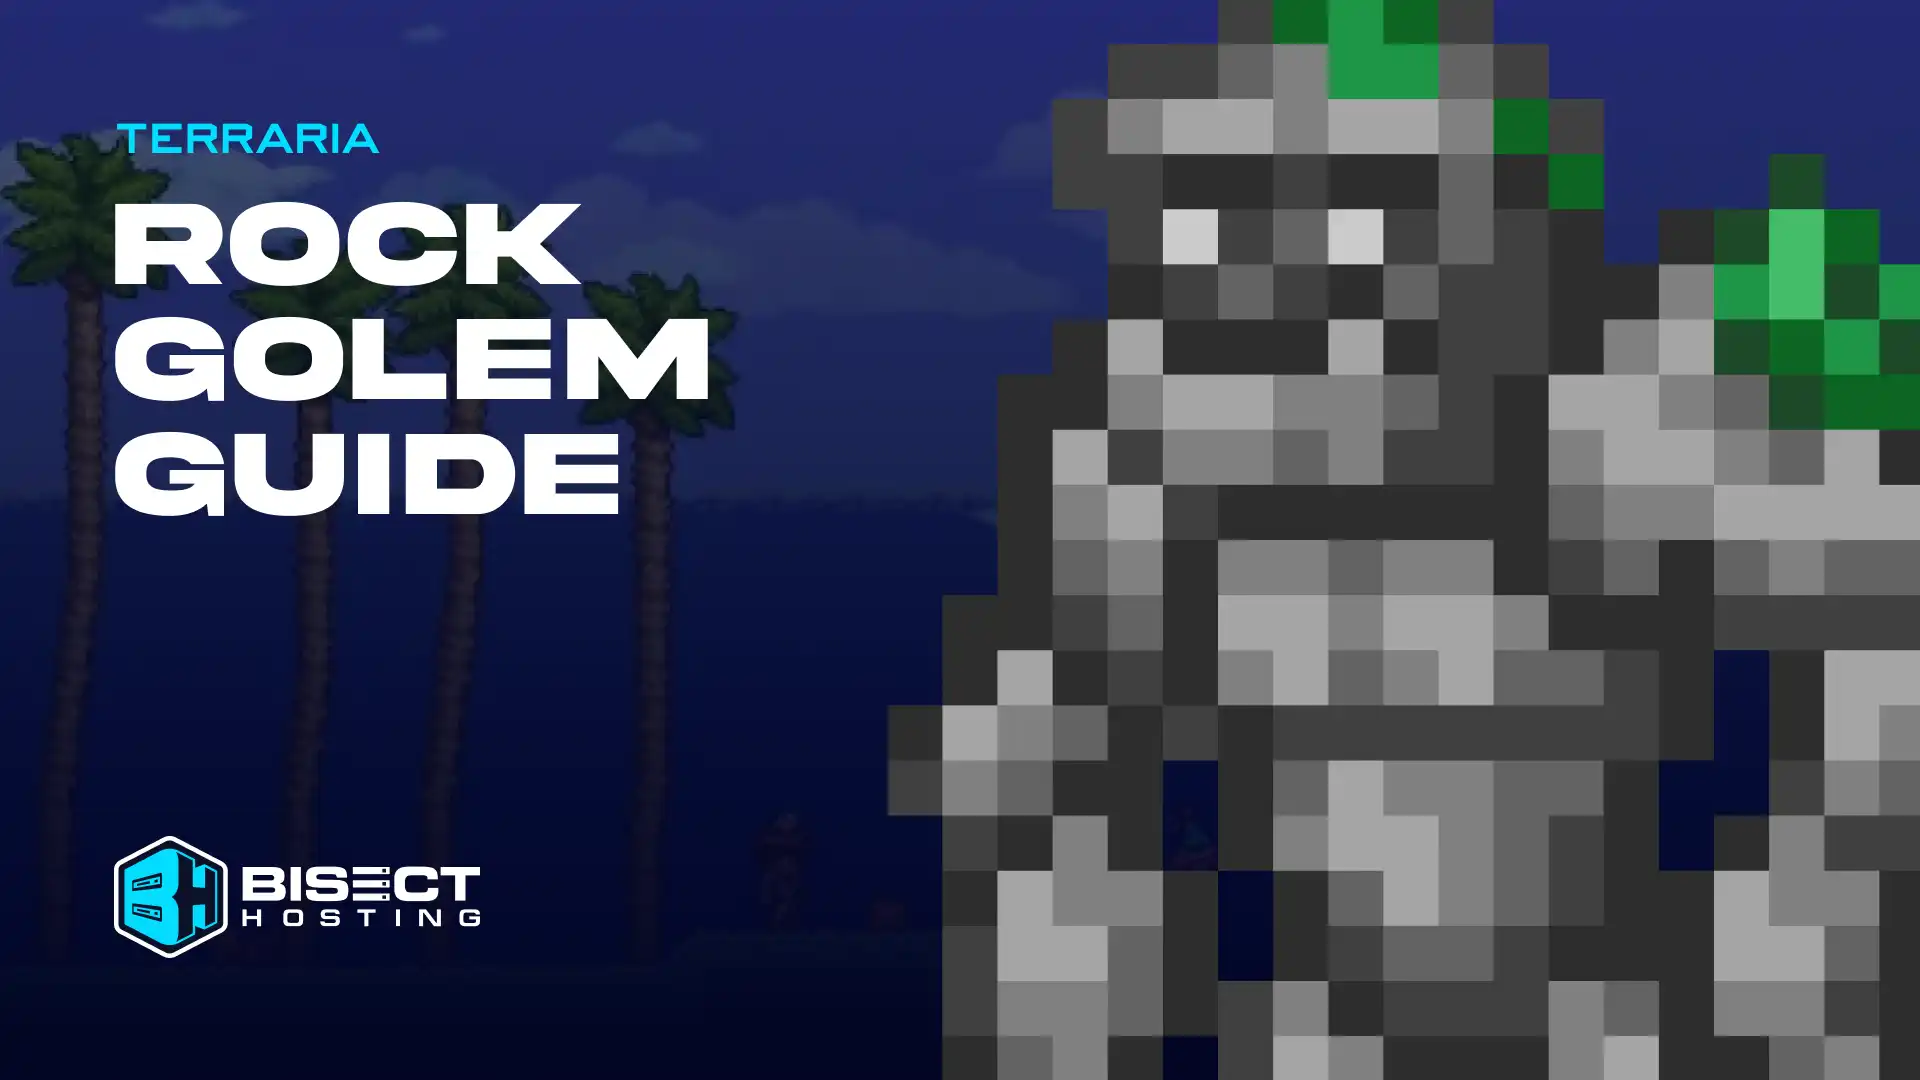 Terraria Rock Golem Guide: Location, Loot Table, & Fight Tips